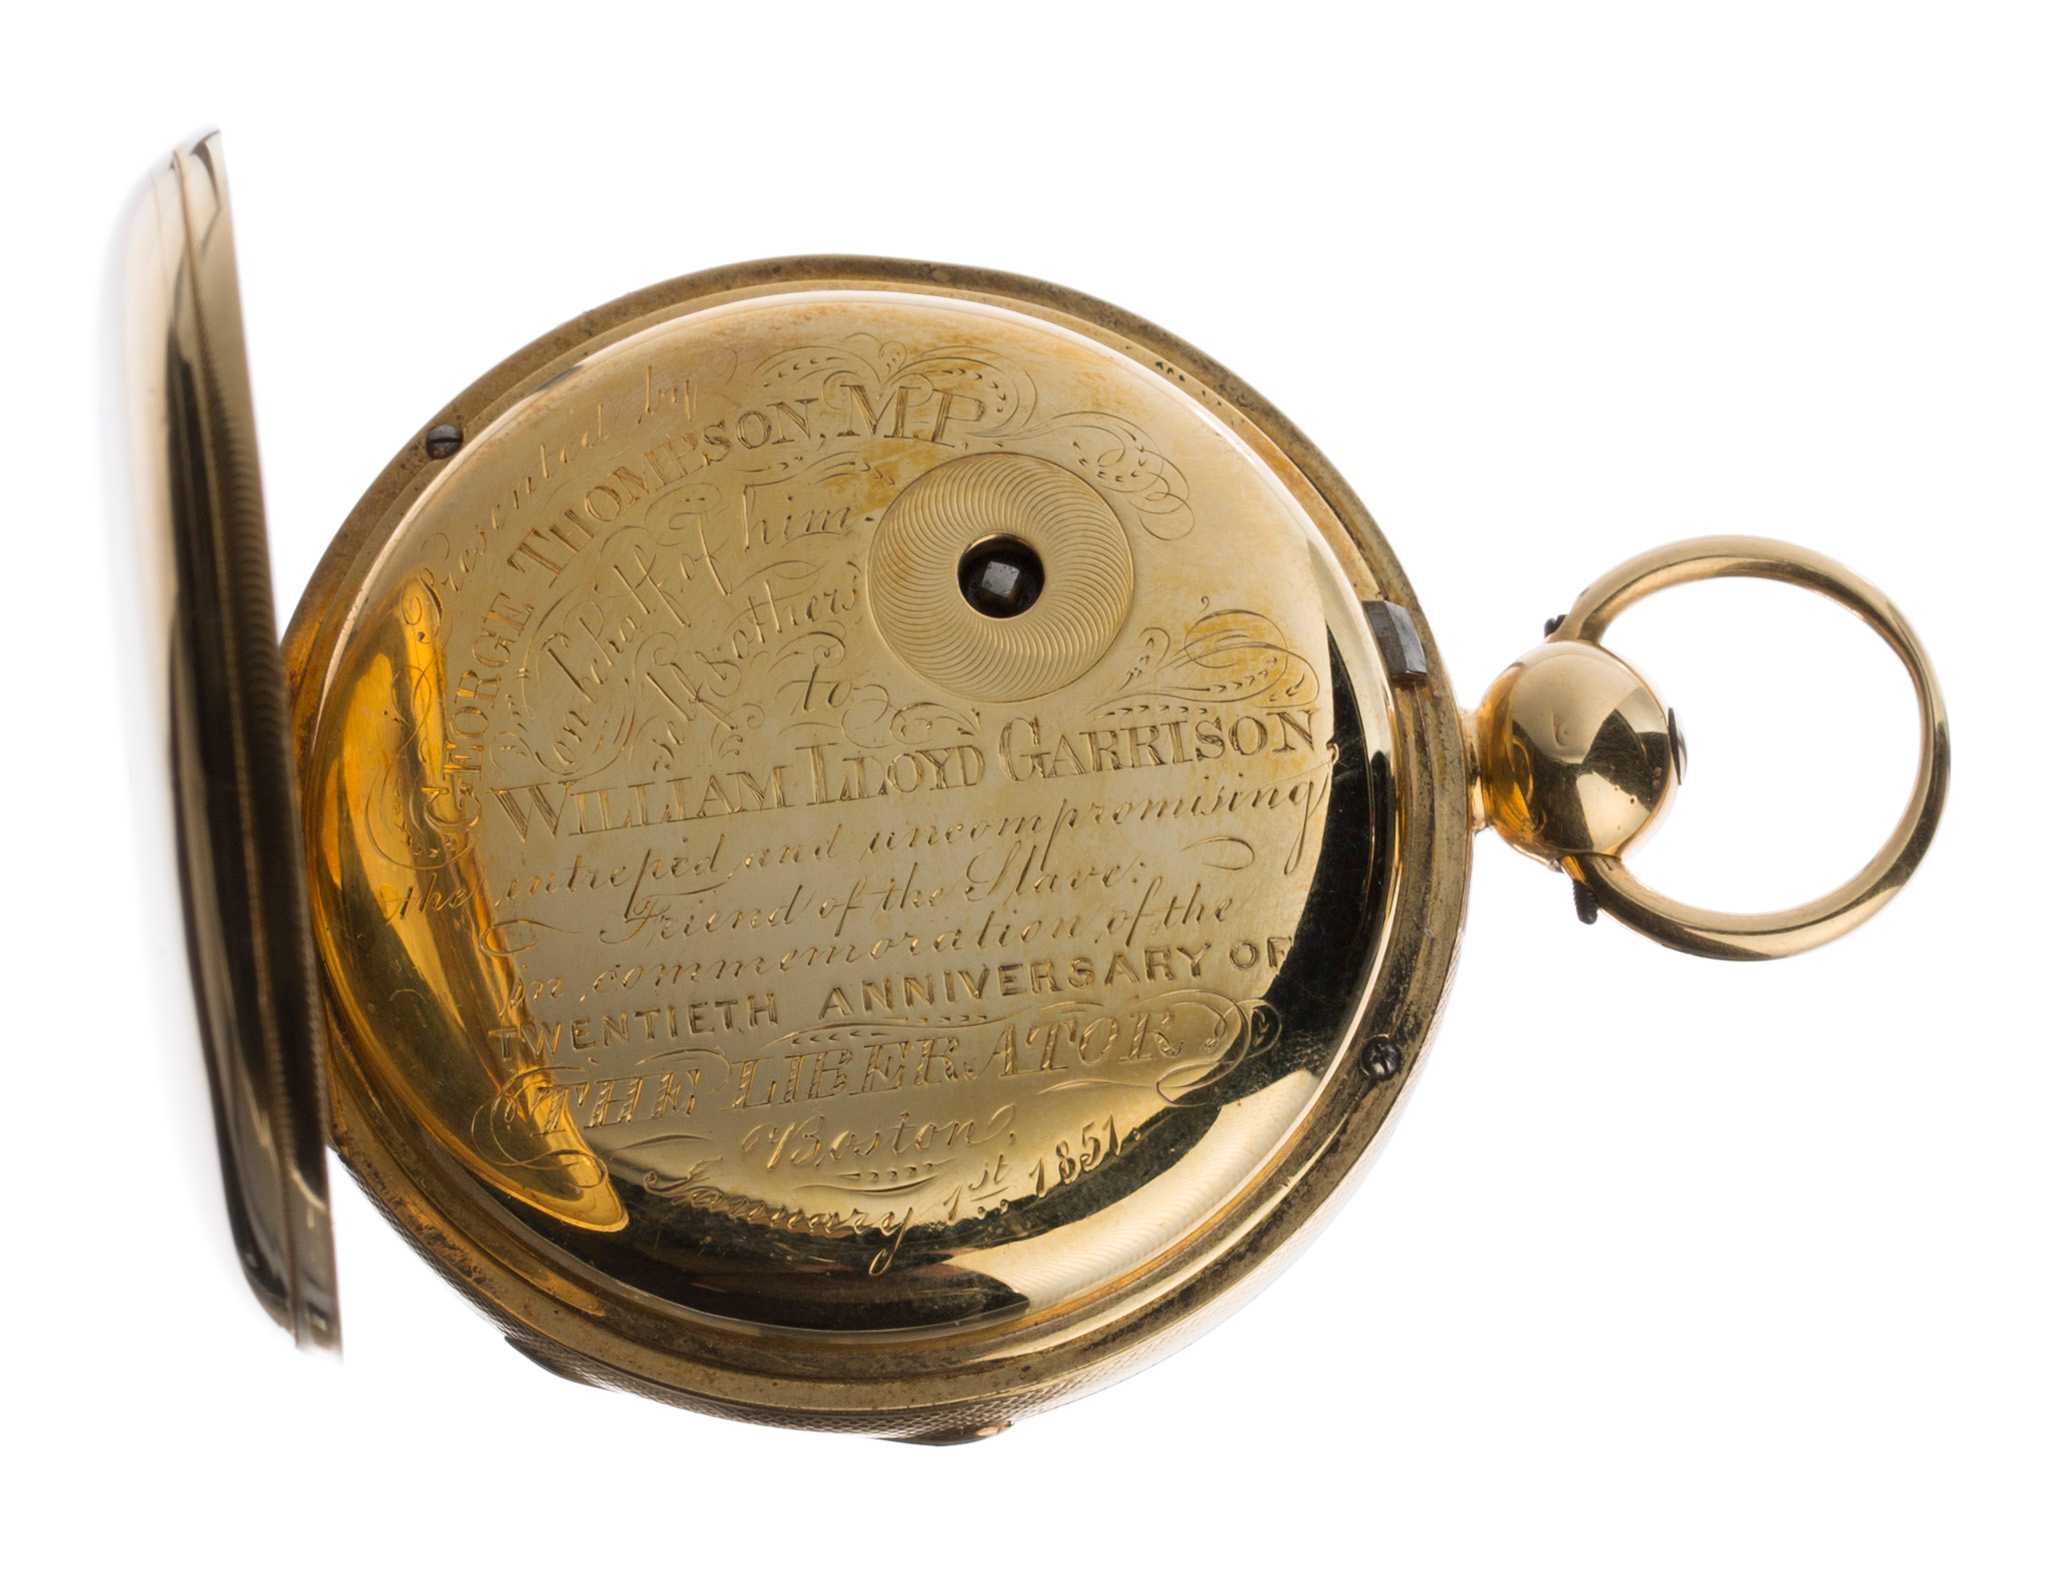 An inscribed gold pocket watch presented to William Lloyd Garrison. The watch has a half hunter case, with spring hinged glass cover over the dial and a hinged gold lid over the back, protecting the inscription and winding square. The dial is painted white with roman numerals and fleur de lis shaped watch hands. There is a smaller 60-second dial partly obscuring the "VI" of the larger dial. The two hinged covers open via a button on the crown and bow, positioned above the "XII" of the dial. The engraved inscription on the back of the watch is decorative and reads [Presented by / GEORGE THOMPSON, M.P. / on behalf of him / self and others / to / WILLIAM LLOYD GARRISON, / intrepid and uncompromising / Friend of the Slave: / in commemoration of the / TWENTIETH ANNIVERSARY OF / THE LIBERATOR / Boston / January 1st, 1851] in several text sizes and fonts. Production and identification marks are stamped and scratched on the inside of the back cover.